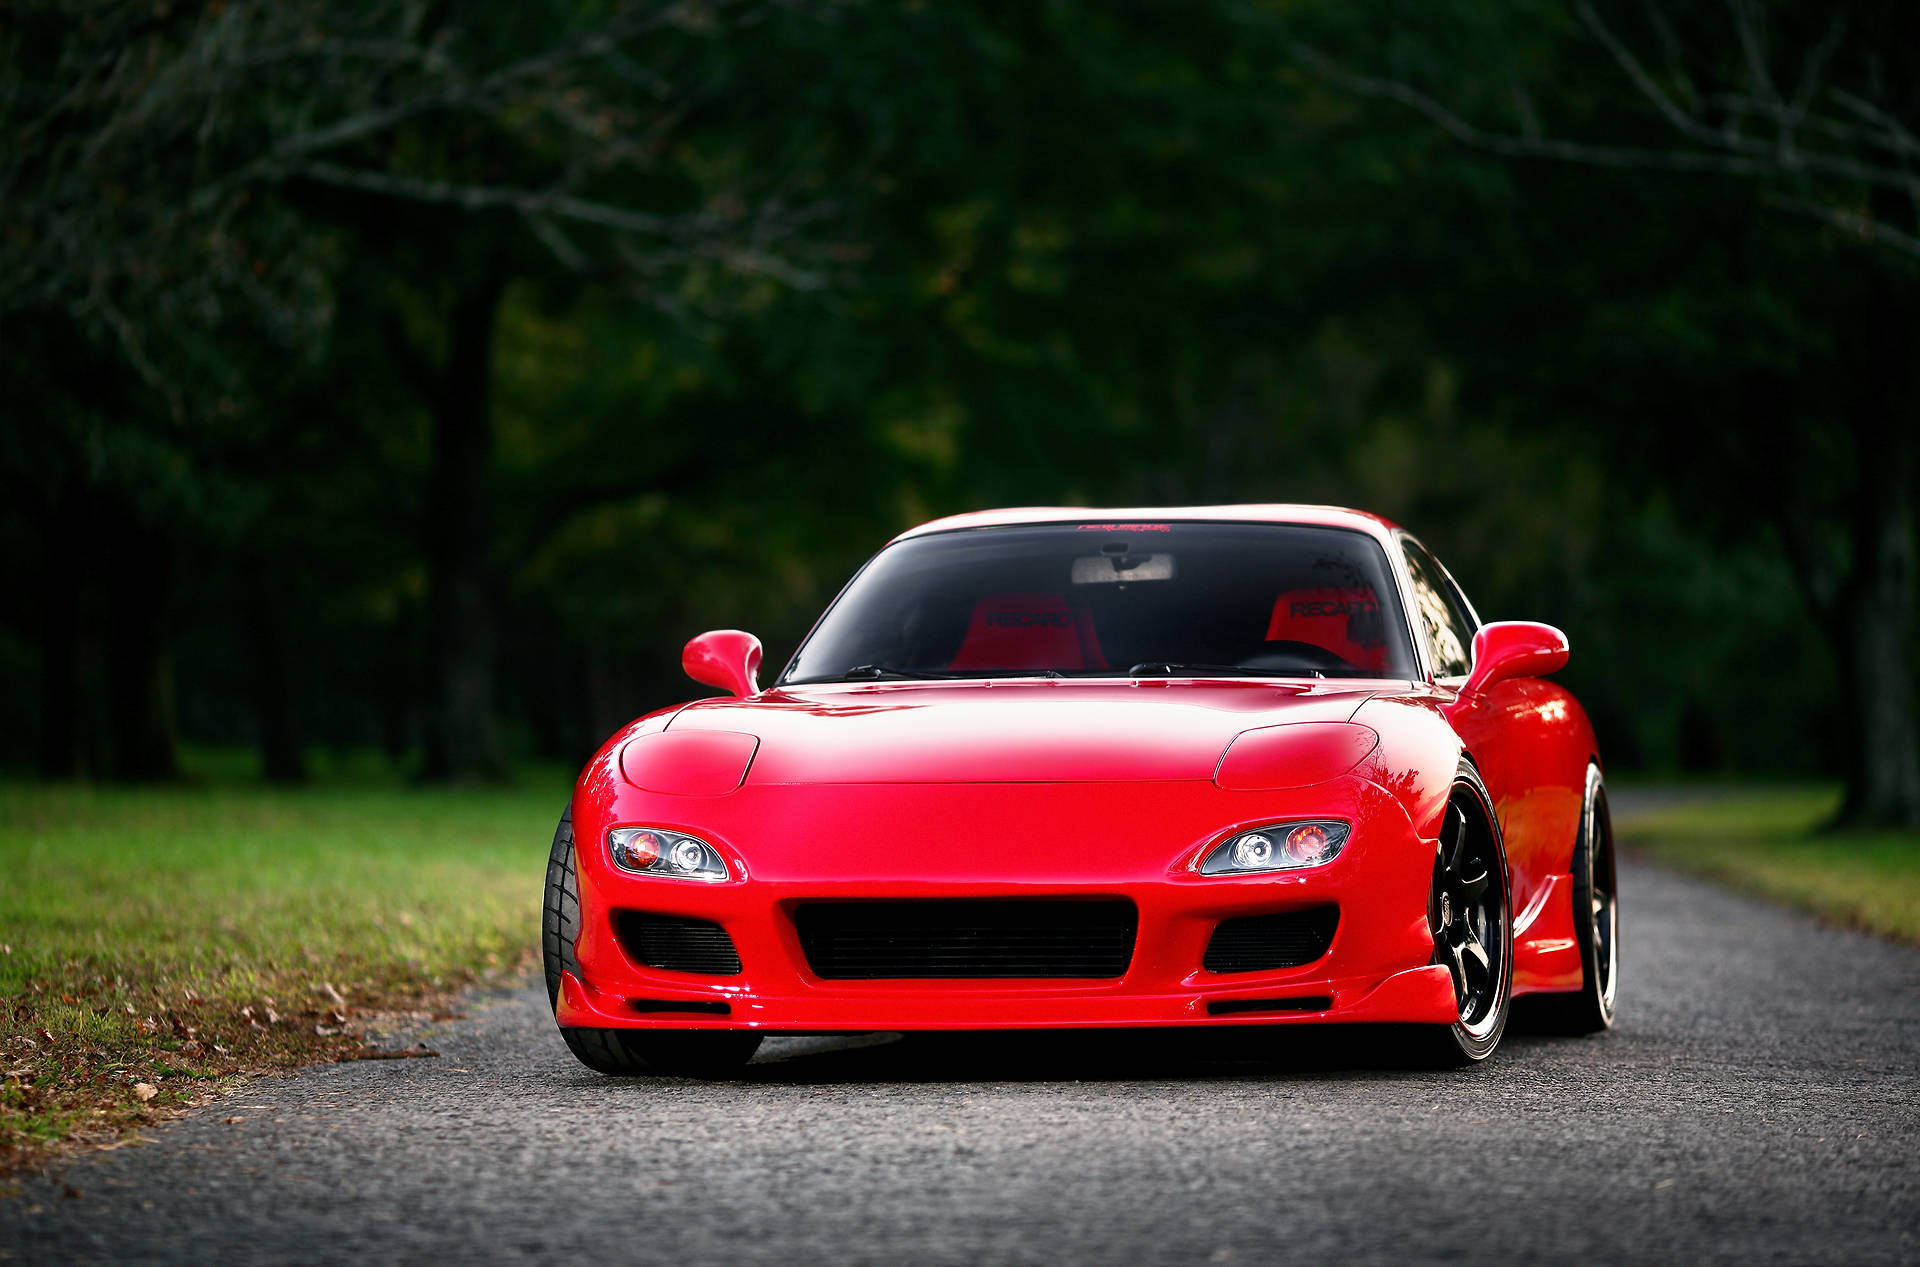 Bright Red Rx7 Car